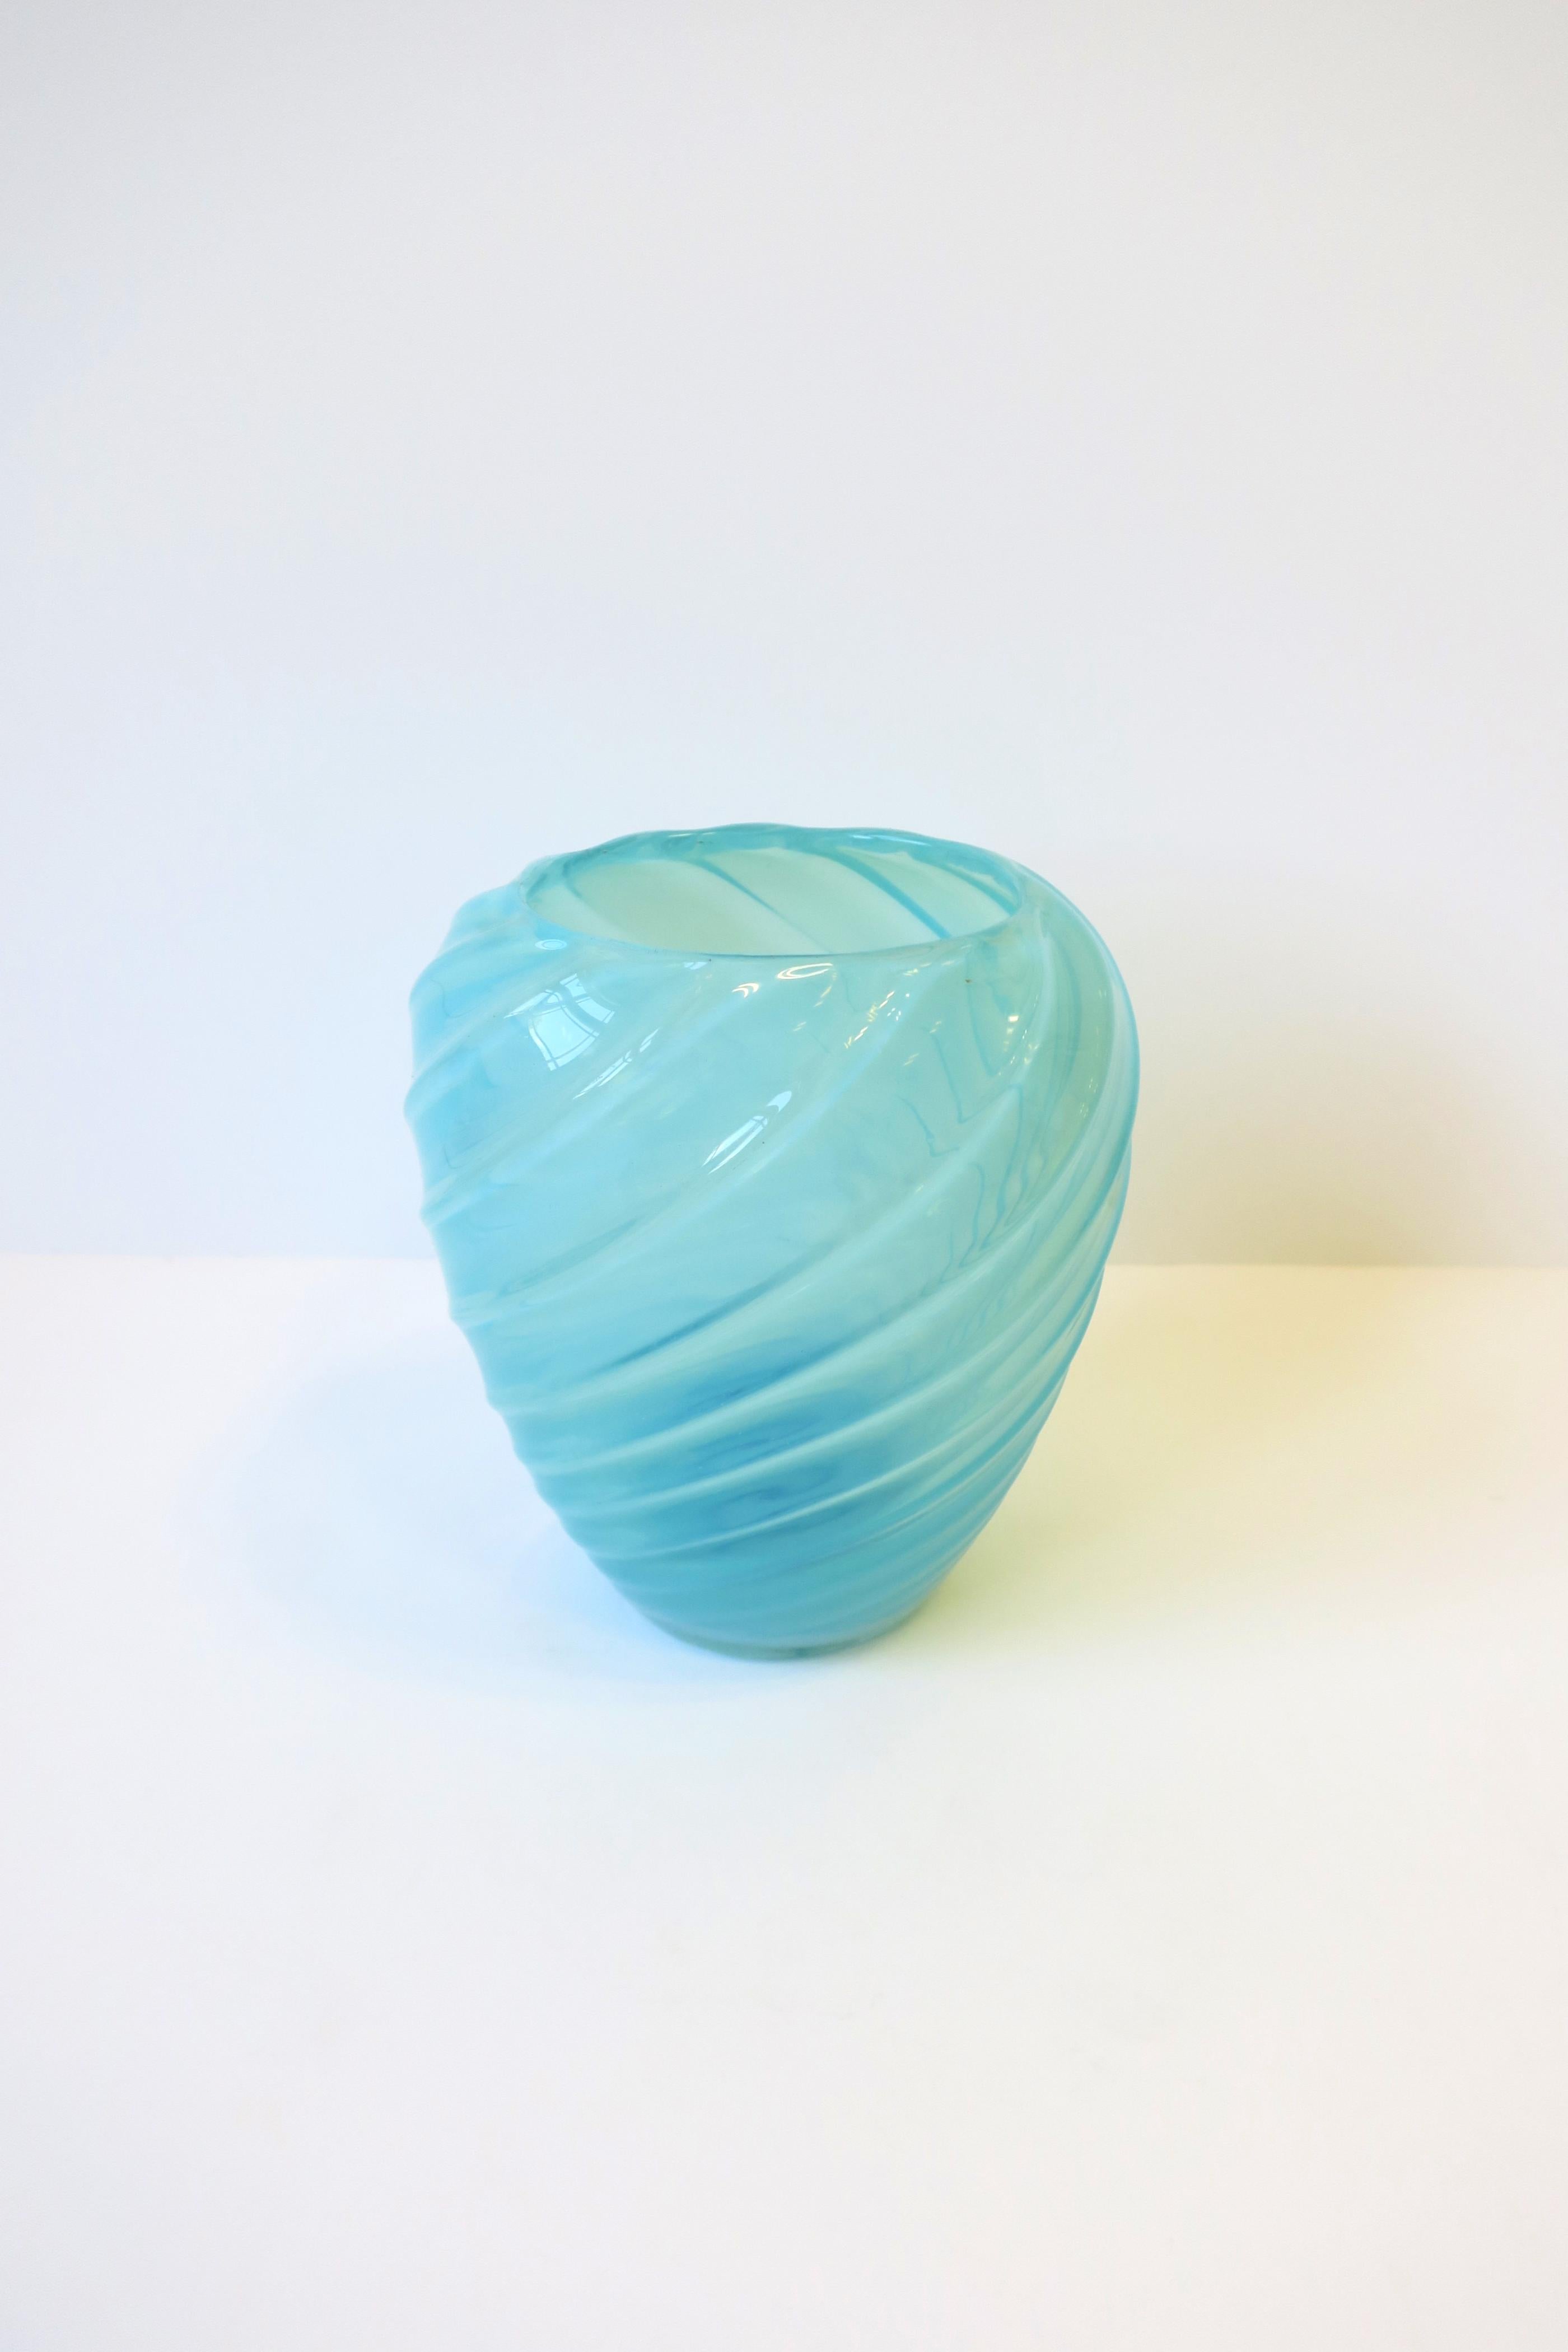 A very beautiful sky-blue opaline Italian Murano art glass vase in the style of Seguso, circa mid-20th century, 1960s, Italy. Vase is a sky blue opaline hue with a twisted fluted design. Beautiful with or without flowers (as shown.)

Dimensions: